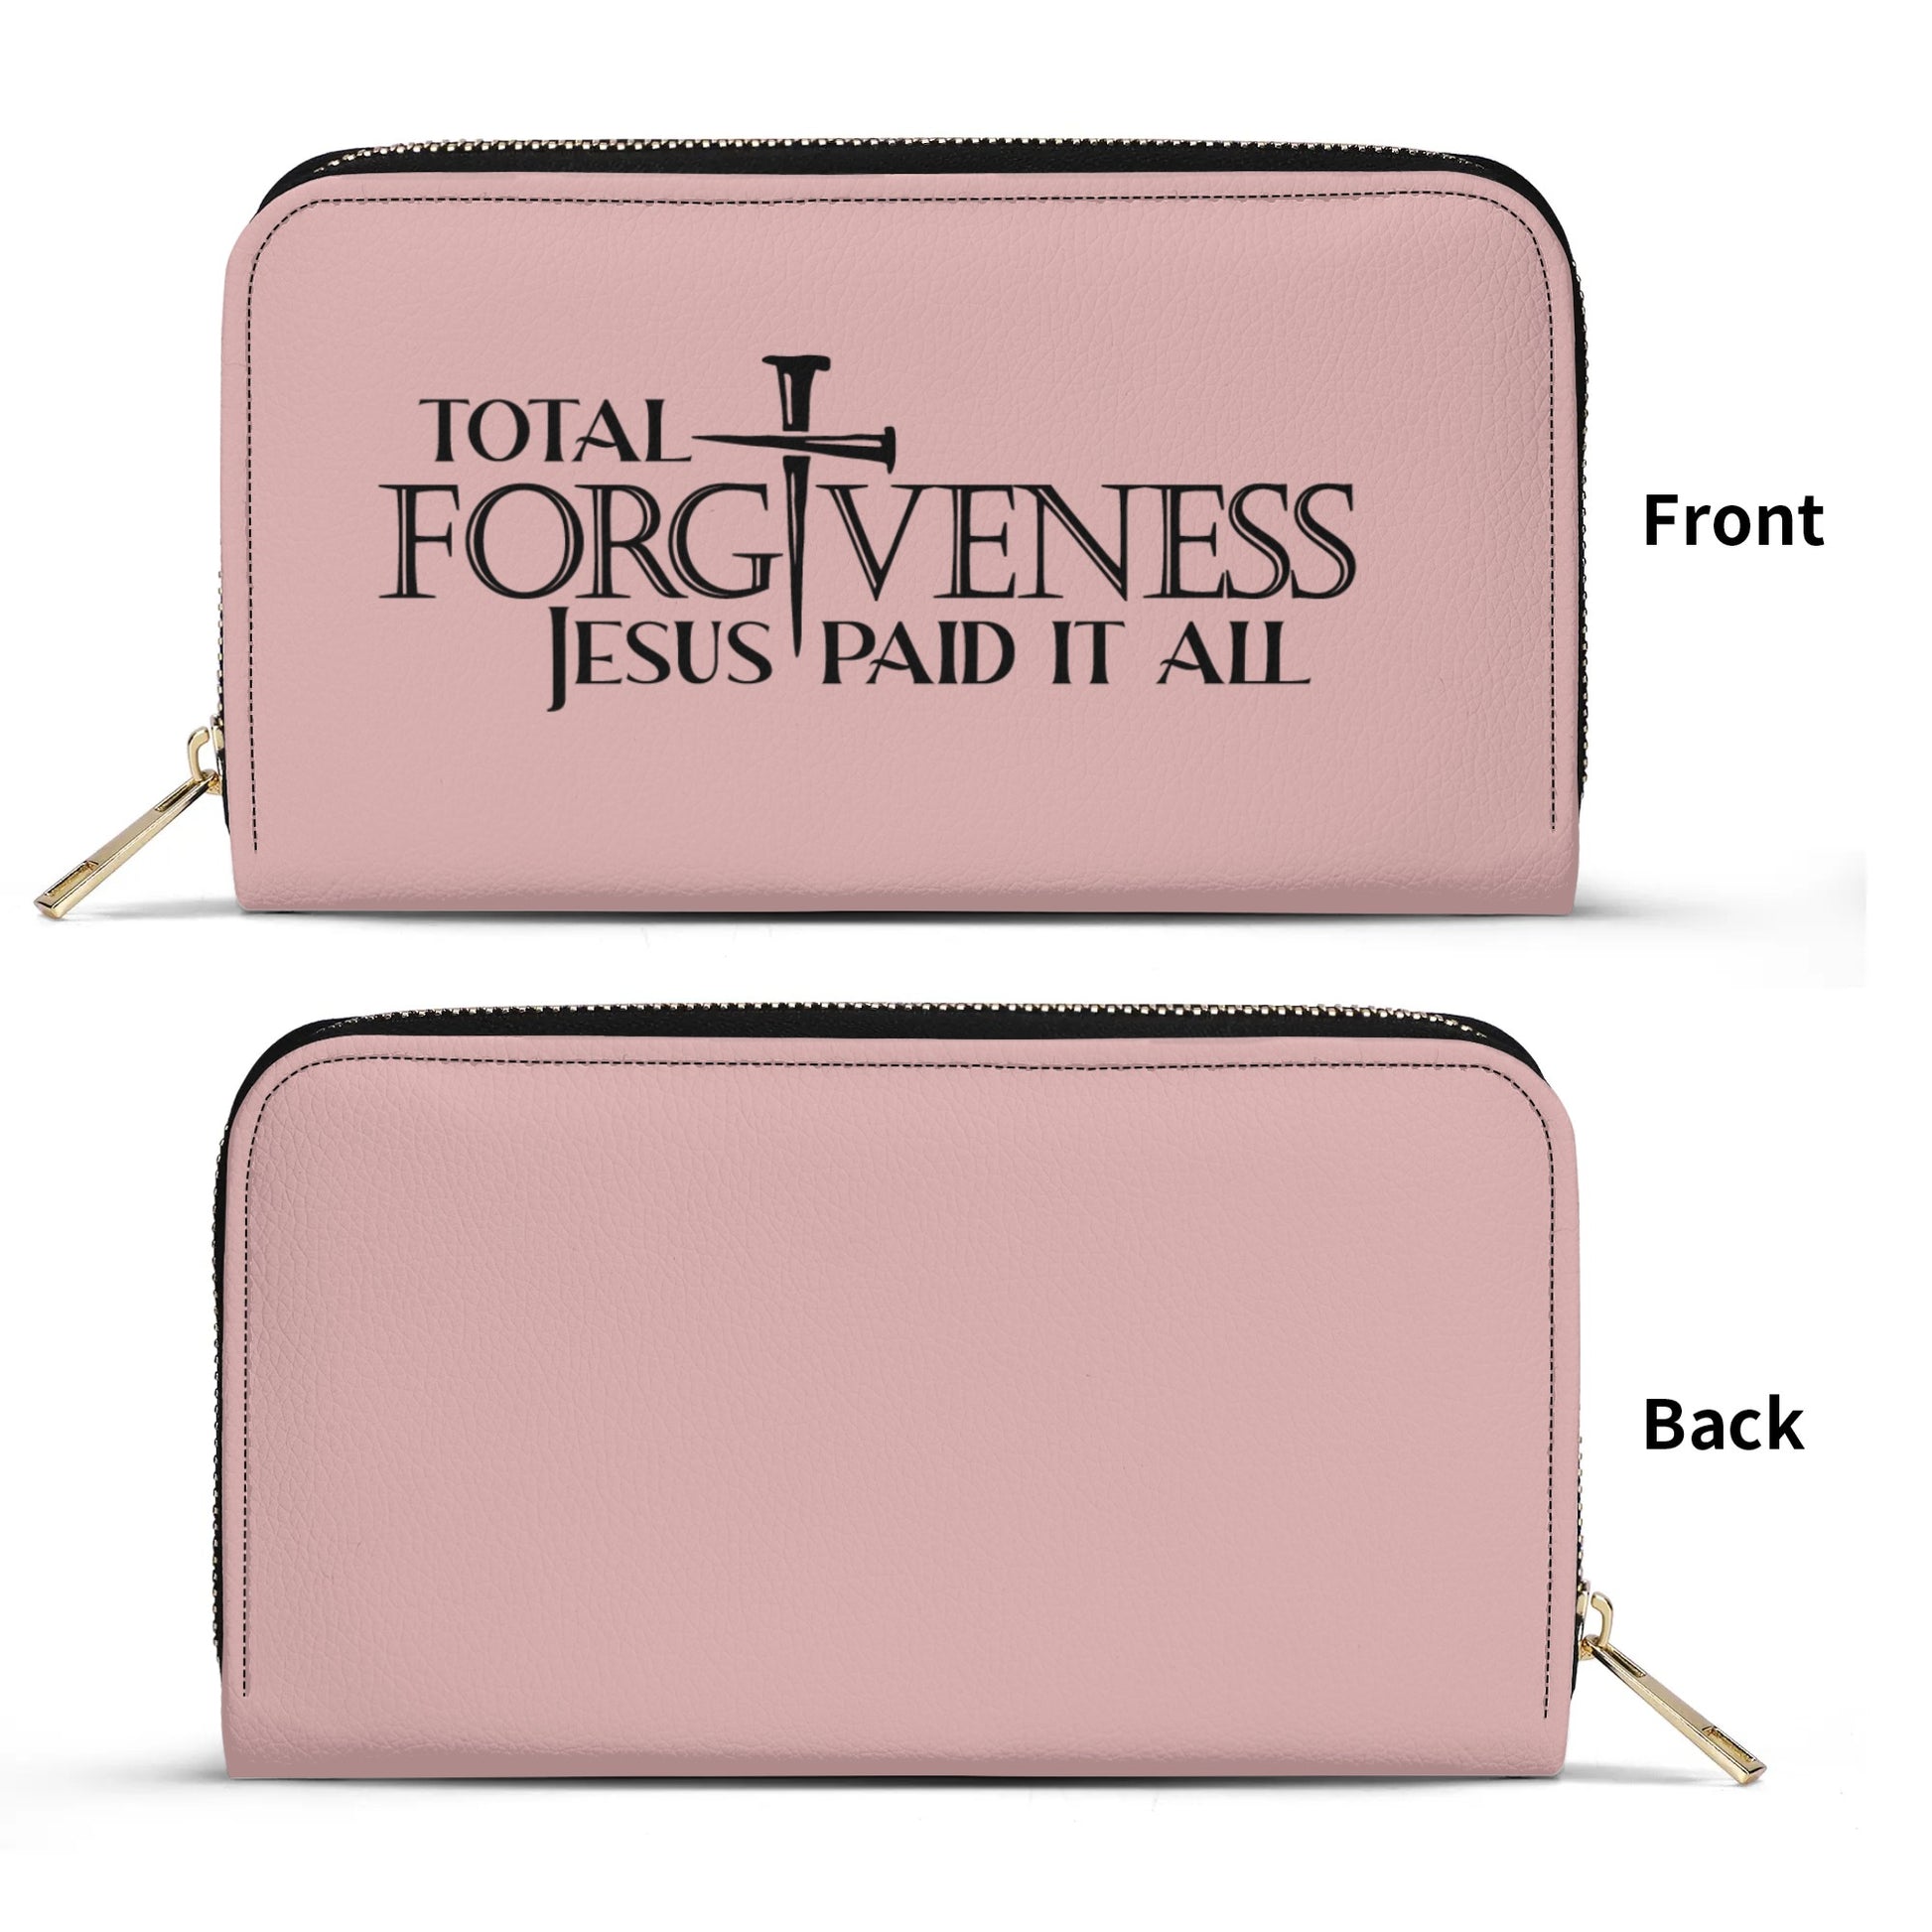 Total Forgiveness Jesus Paid It All PU Leather Womens Christian Wallet popcustoms